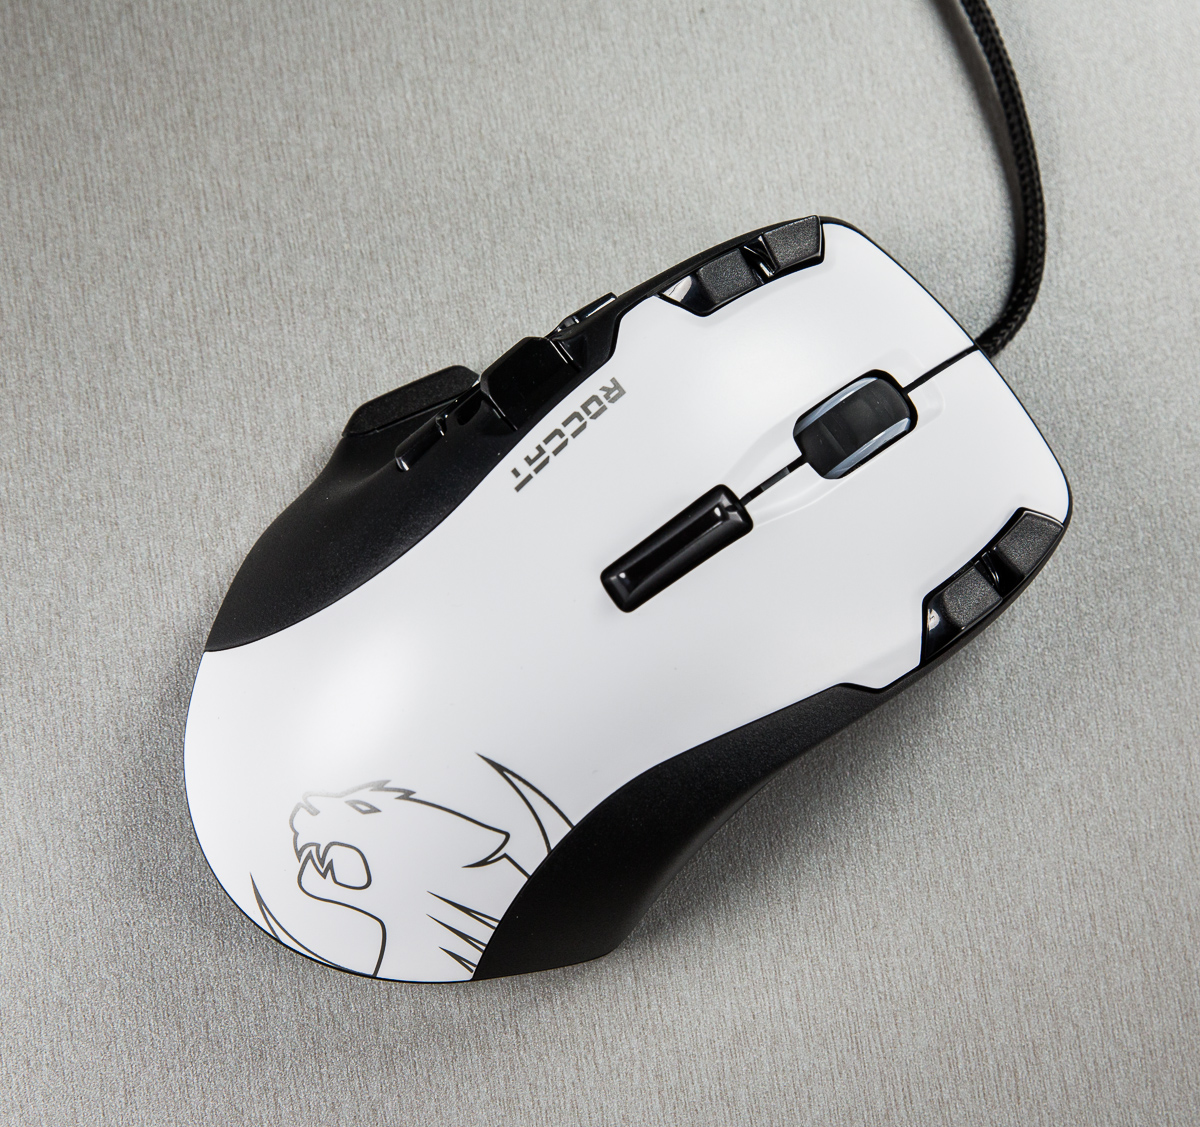 Roccat-tyon-hiir-photopoint-5